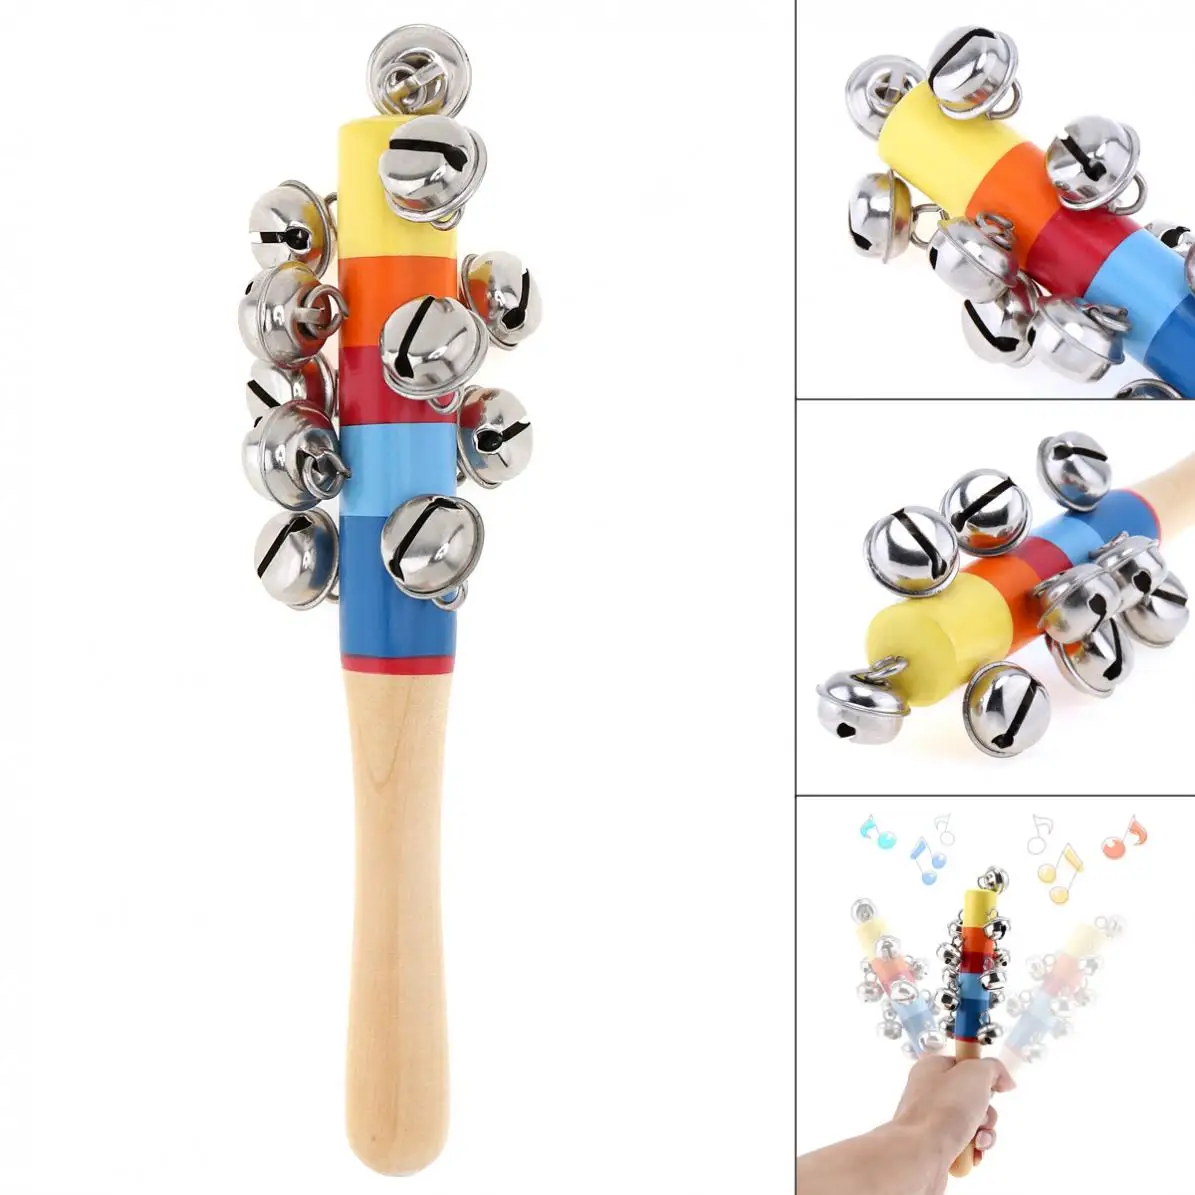 

Colorful Wooden Bell Stick 11 Jingle Bells Hand Shake Rattles Baby Kids Children Educational Musical Instrument Toy